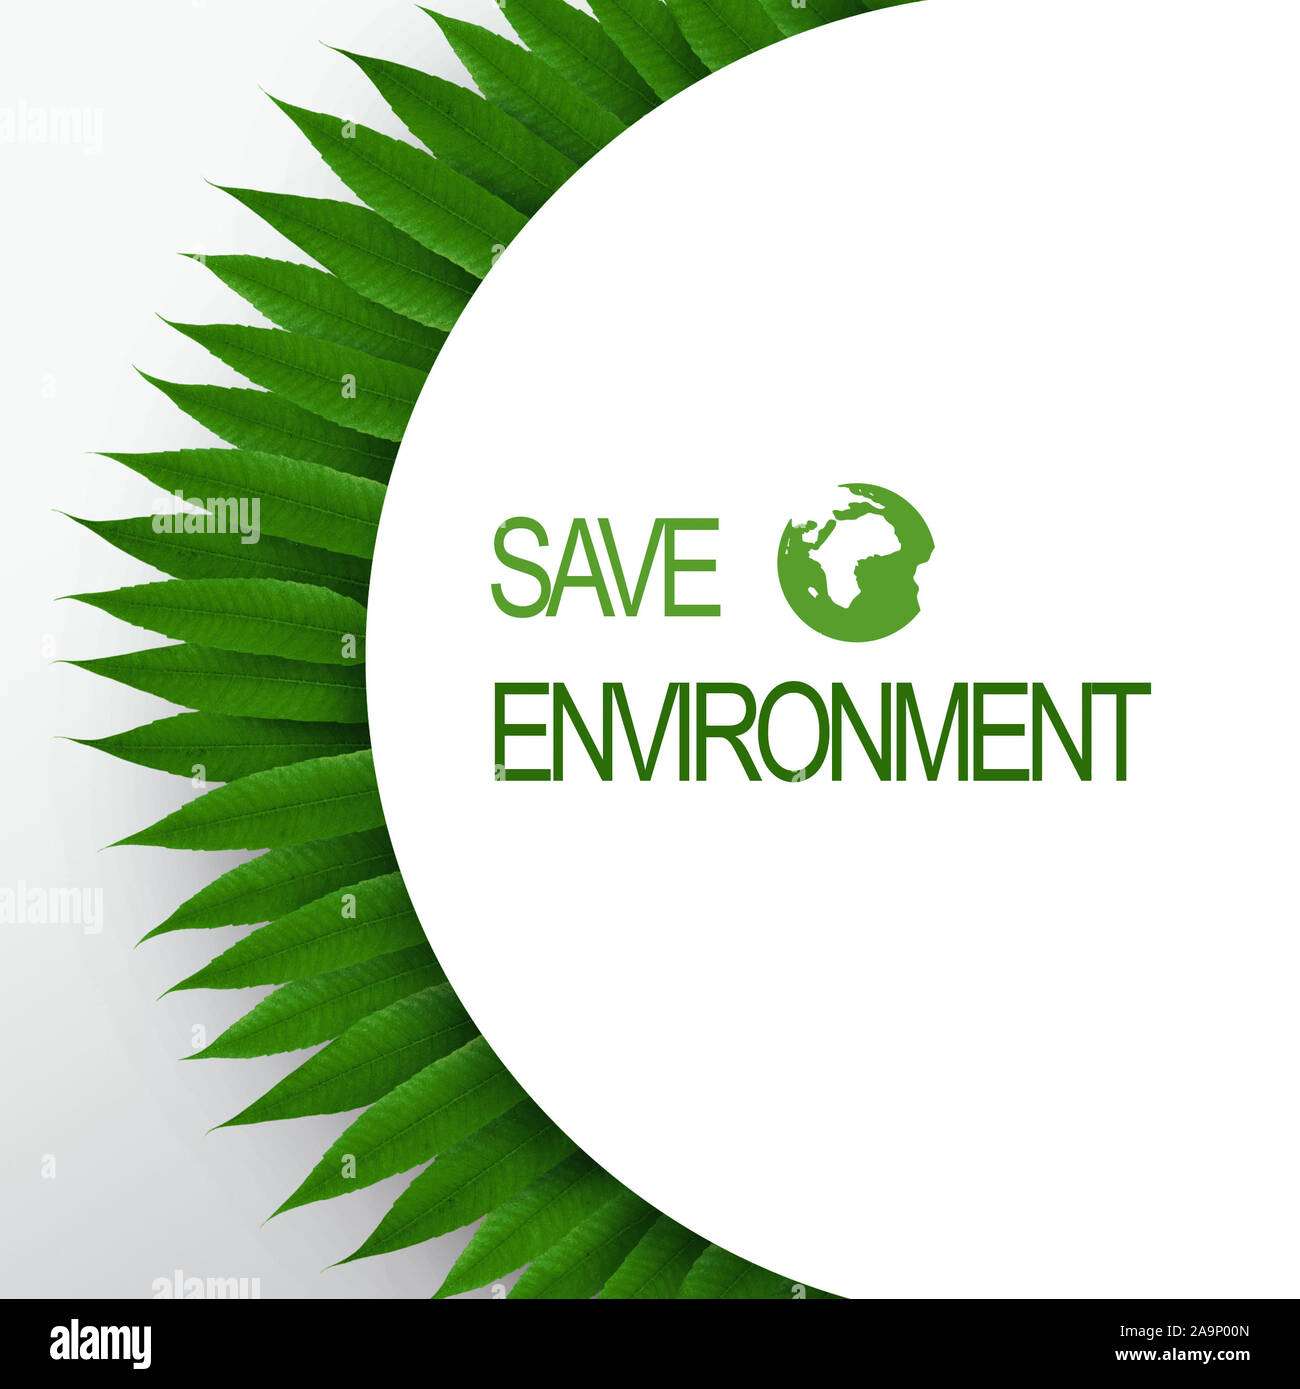 Save environment poster with fresh green leaves Stock Photo - Alamy